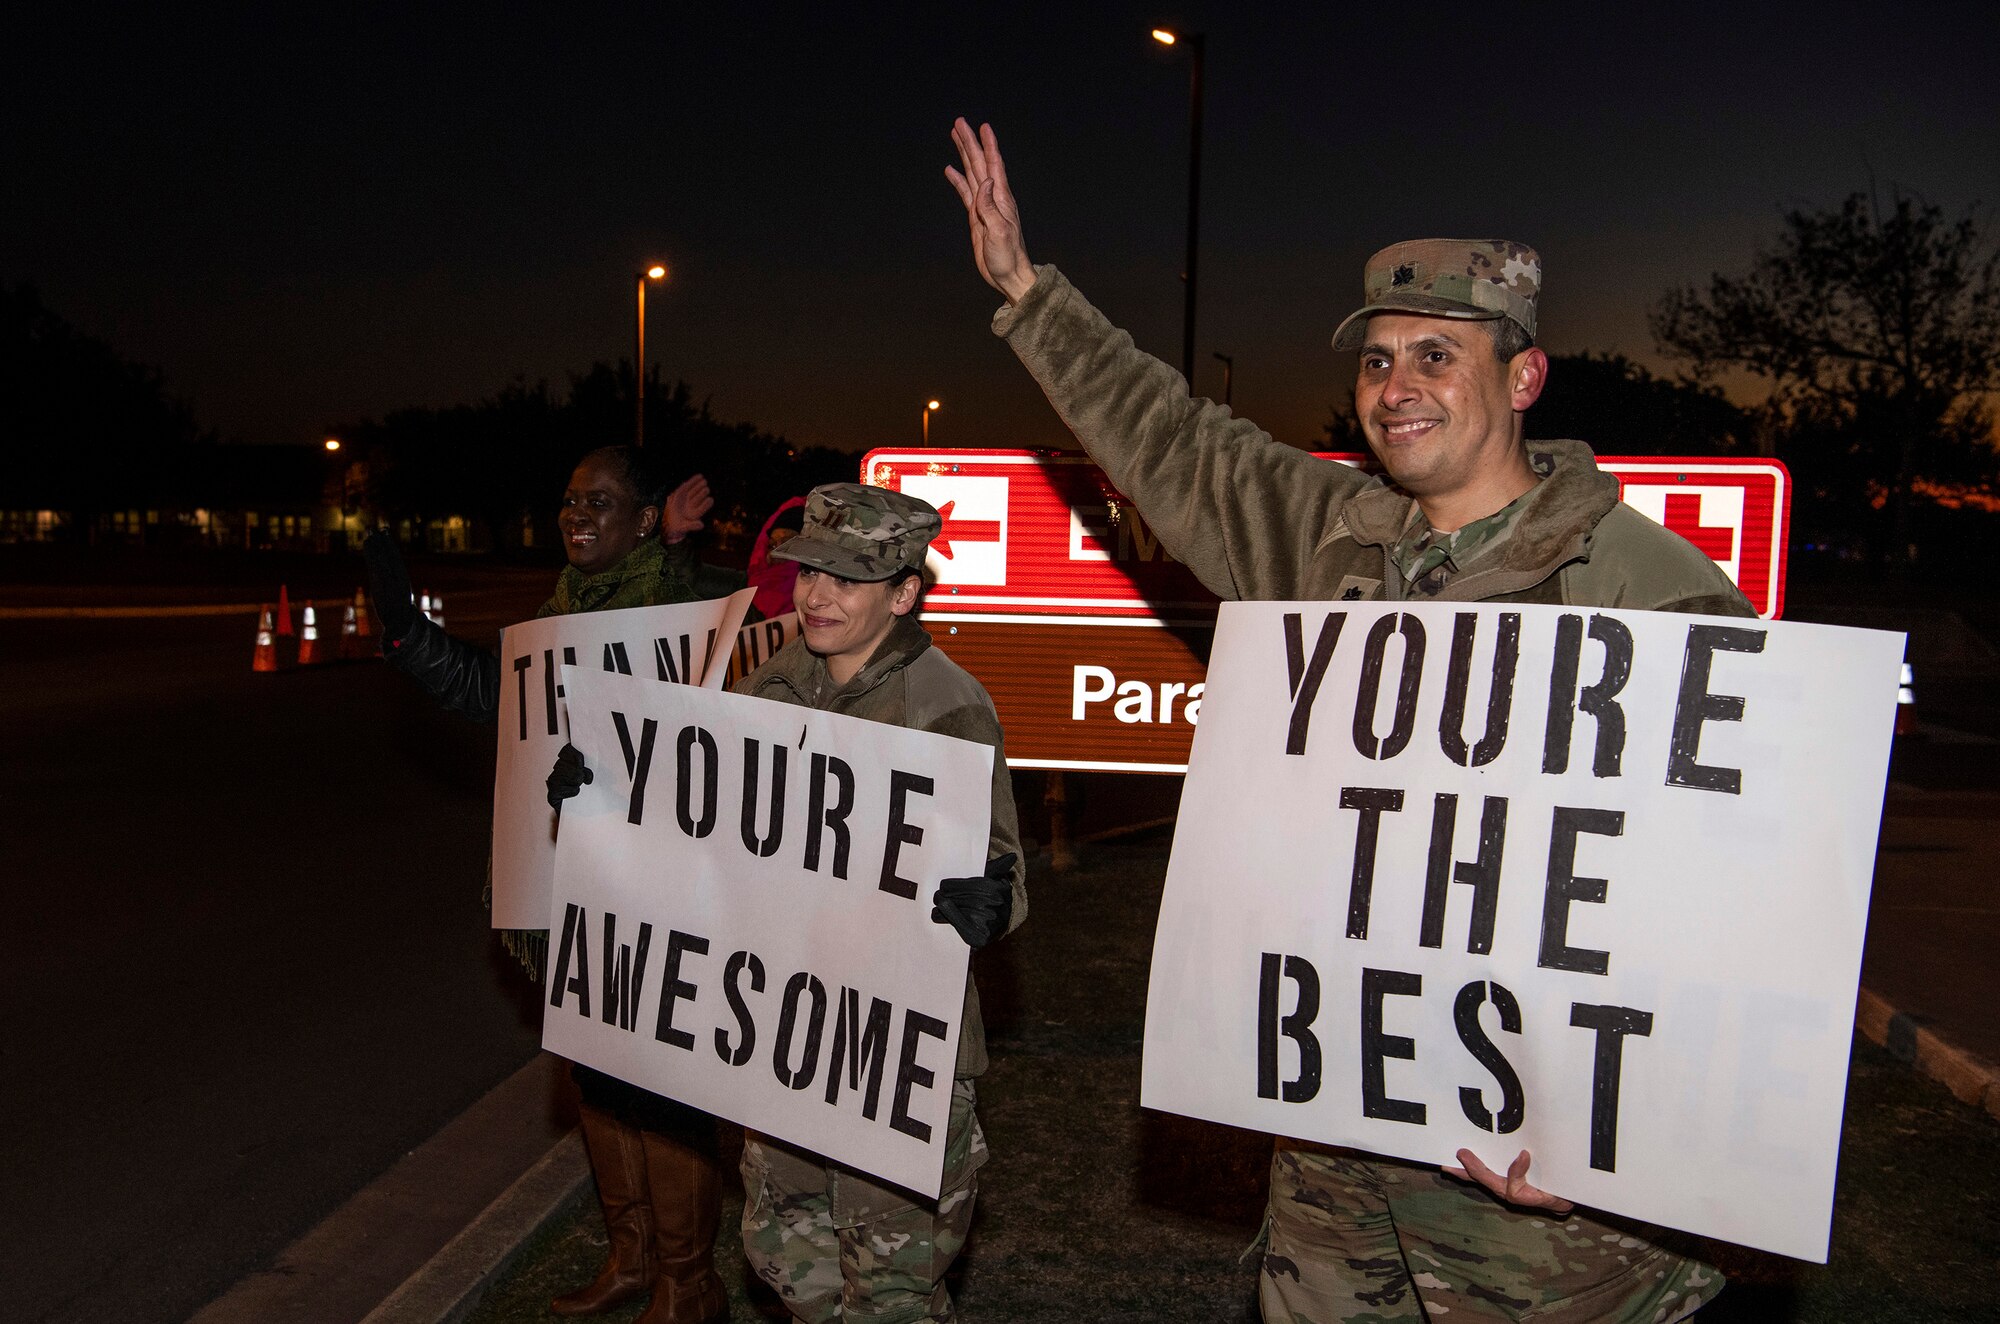 From right, Lt. Col. Raymundo Vann, 323rd Training Squadron commander, Capt. Jessica Stanley, 737th Training Group and Lydia Davidson, wife of Col. Isaac Davidson, Inter-American Air Forces Academy commandant, hold positive messages of support at a base gate during the morning inbound commute as part of their new initiative, “We Care,” at Joint Base San Antonio-Lackland, Texas, Dec. 18, 2019. The initiative involved 37th Training Wing military and civilian members spending the morning at various gates letting each person know that they stand together in support of those struggling with depression and thoughts of suicide by holding a positive message of support and handing out over 400 candy canes. If you are struggling with thoughts of suicide, please go directly to the Mental Health Clinic or to your closest Emergency Room. You can also reach the National Suicide Prevention Lifeline at 1-800-273-8255.